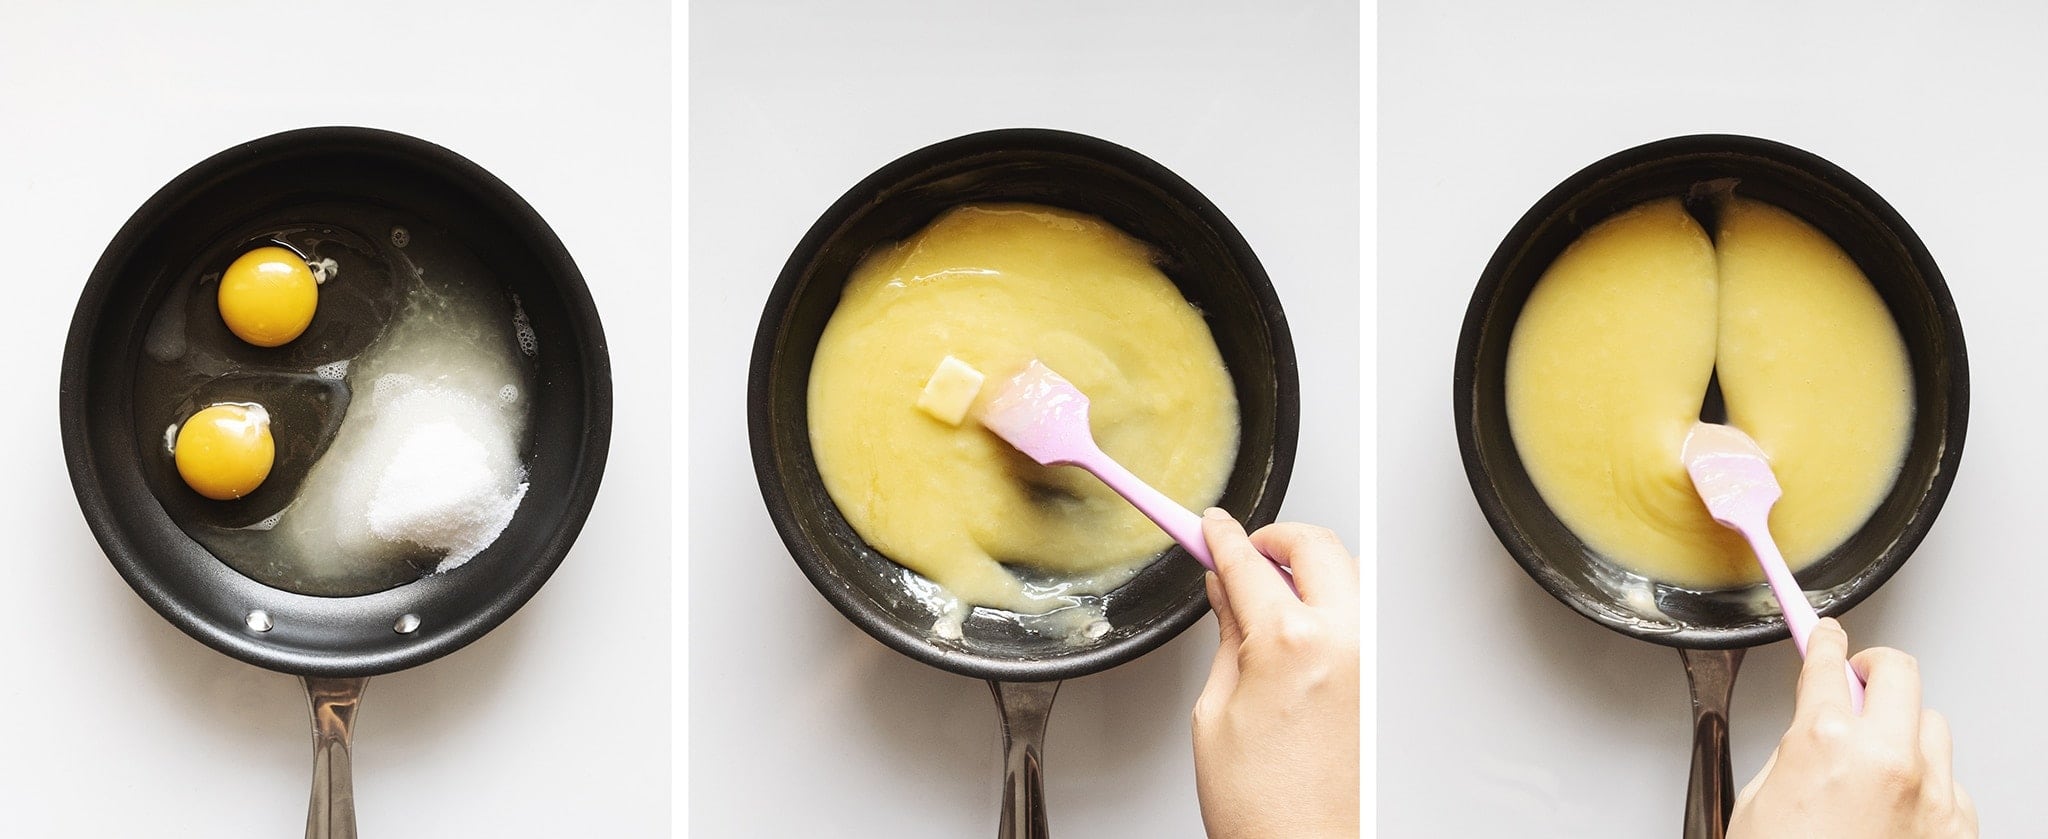 Mixing eggs, sugar, and butter in a pan